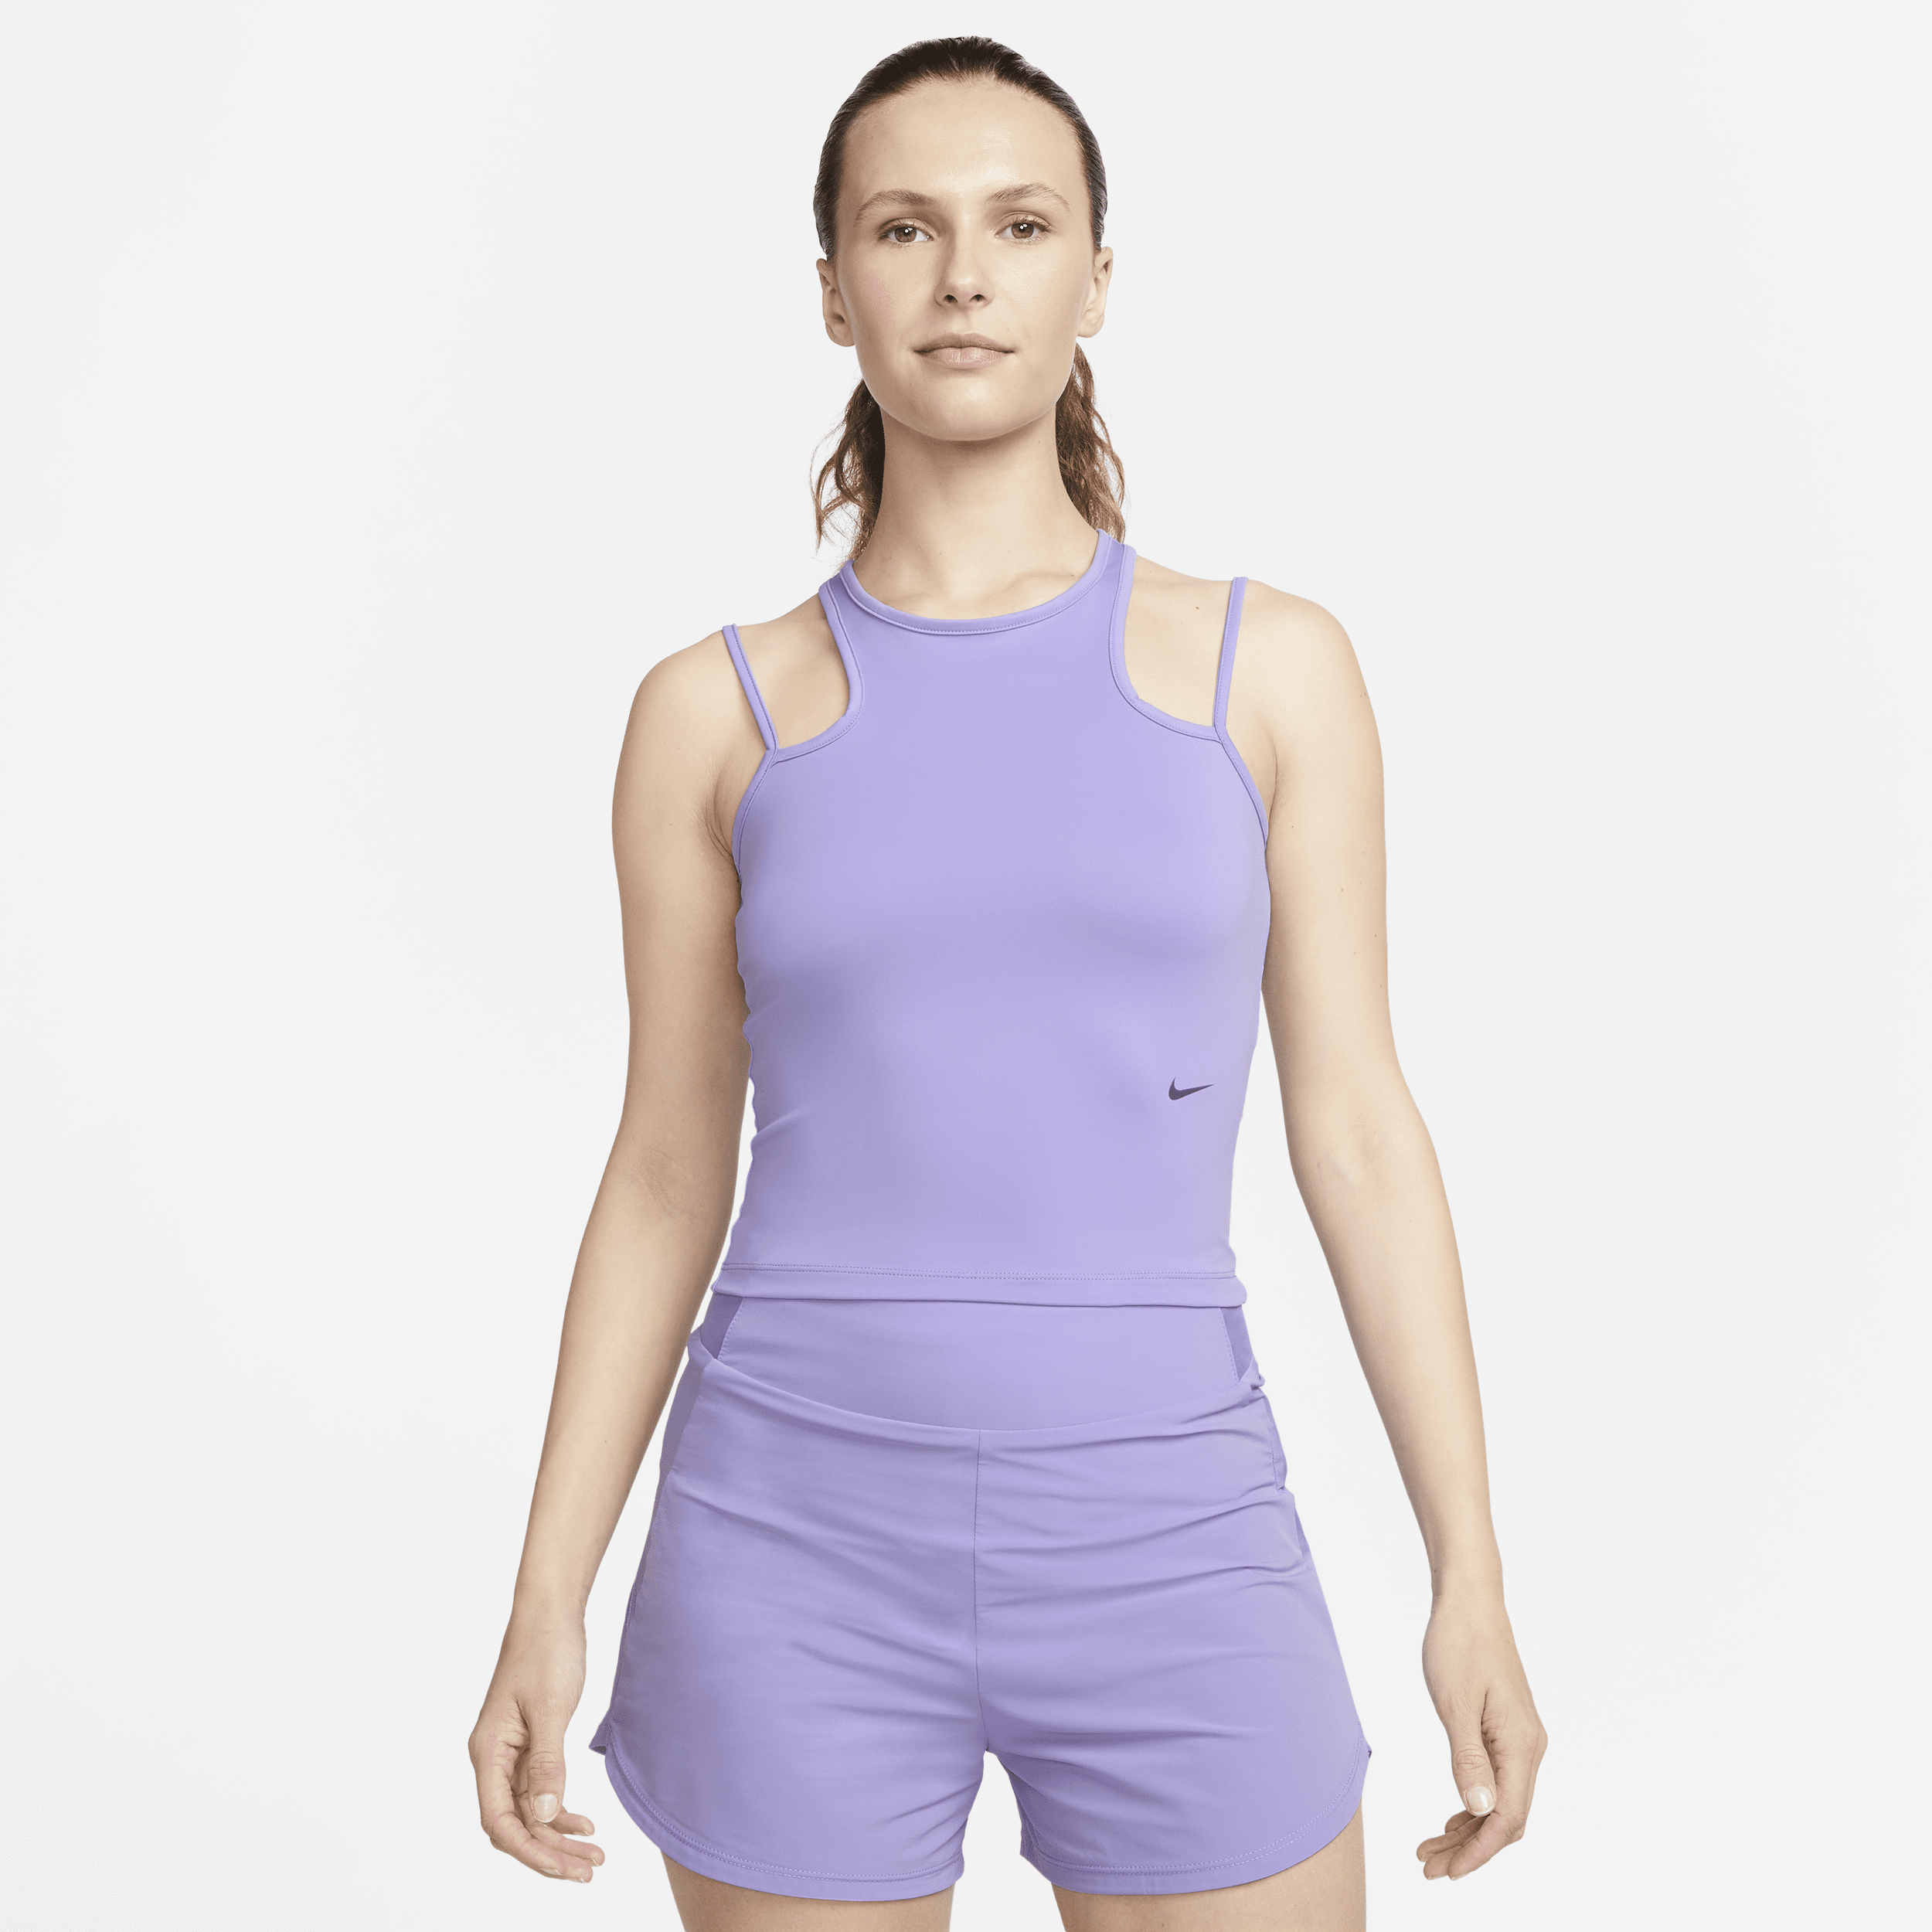 Nike Dri-FIT Stealth Evaporation City Ready Tanktop voor dames - Paars